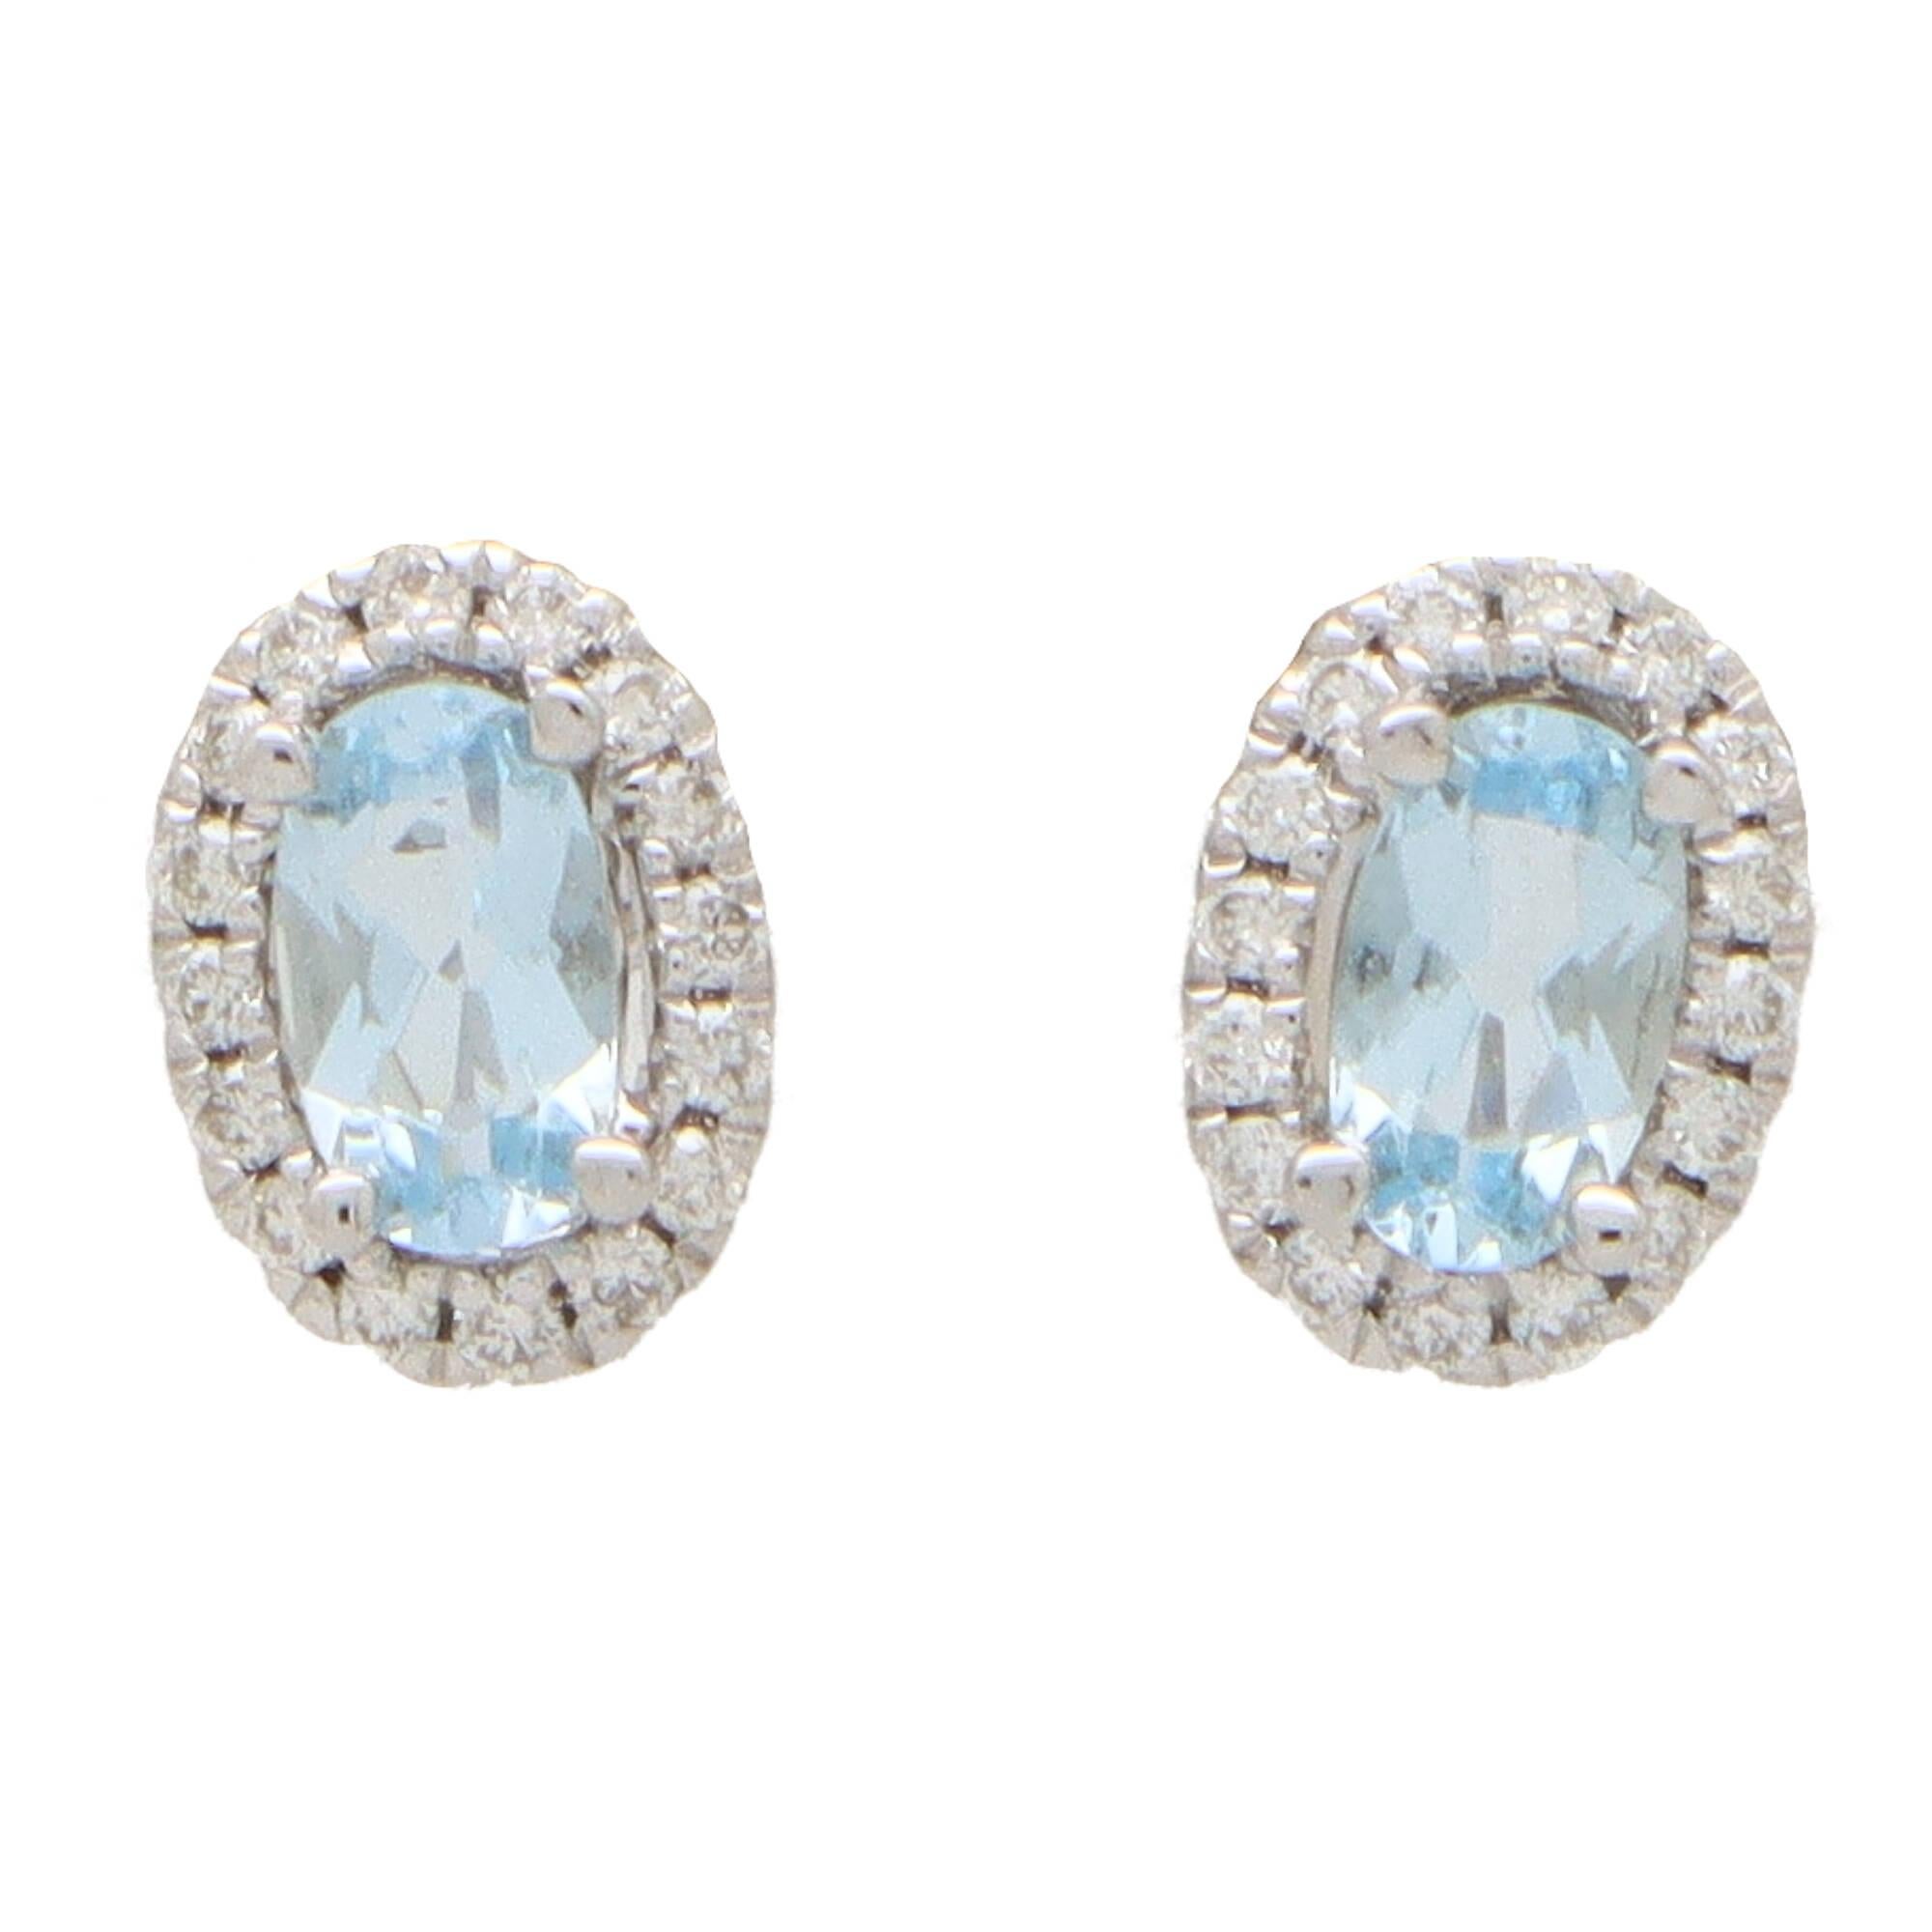 A lovely pair of aquamarine and diamond oval halo earrings set in 18k white gold.

Each earring centrally features a beautiful sky blue coloured oval shaped aquamarine surrounded by a halo of 16 round brilliant-cut diamonds. All of the stones are